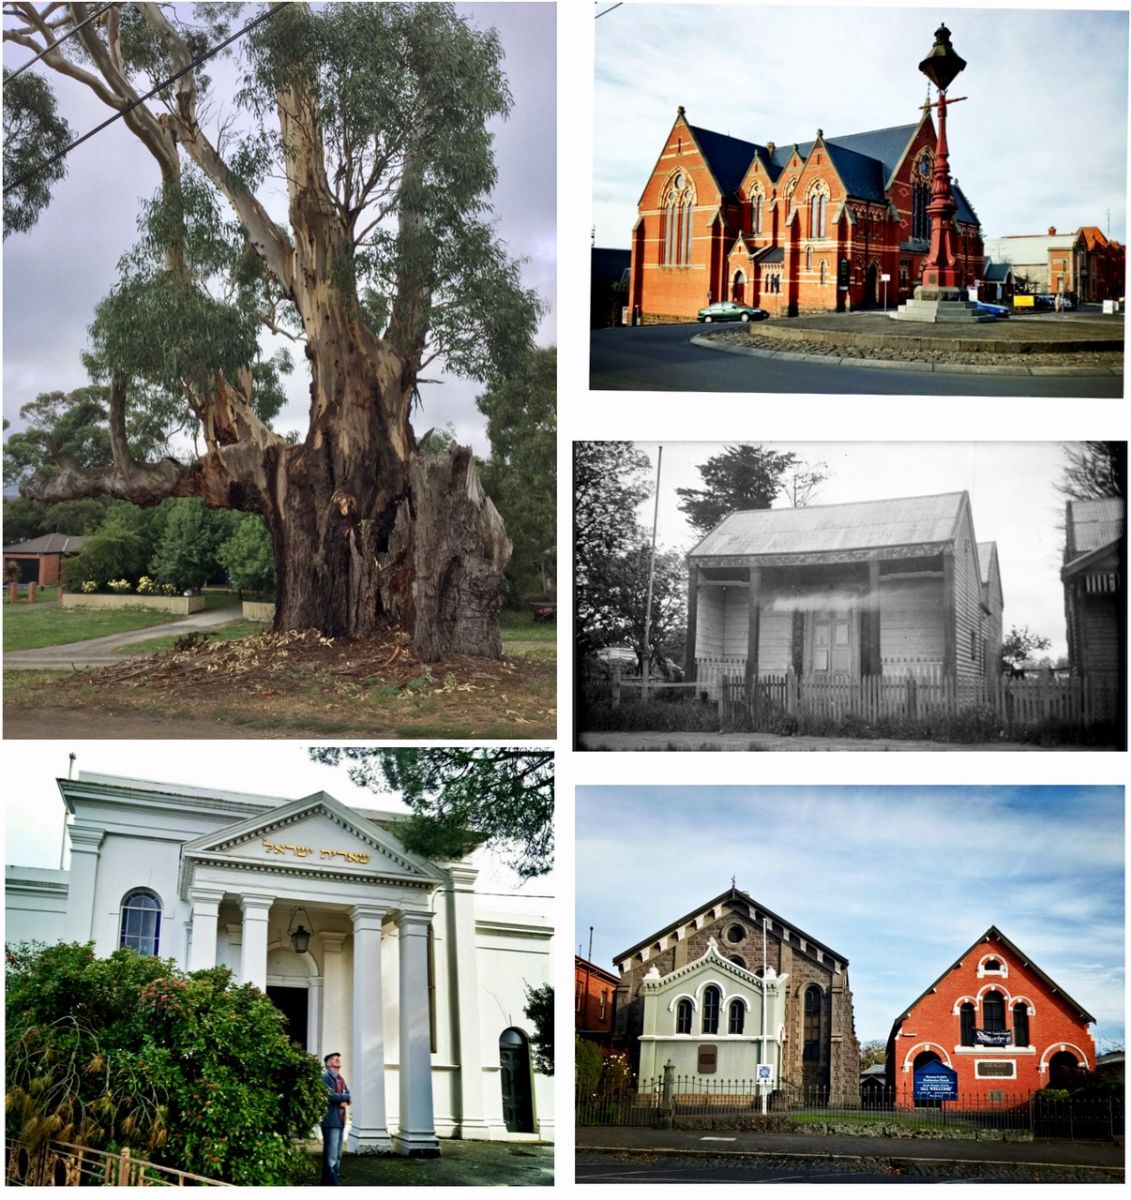 Sacred Places Collage anticlockwise from top right: Central Uniting Church, 103 Lydiard Street source Georgina Williams;  The Meeting Tree, Buninyong source Georgina Williams; Ballarat Synagogue, 2 Barkly Street, Ballarat East source Georgina Williams; Ebenezer St John's Presbyterian Church, 212 Armstrong Street South, source Georgina Williams; Ballarat - Chinese Joss House, VPRS 10516/P3 Unit 2 source PROV